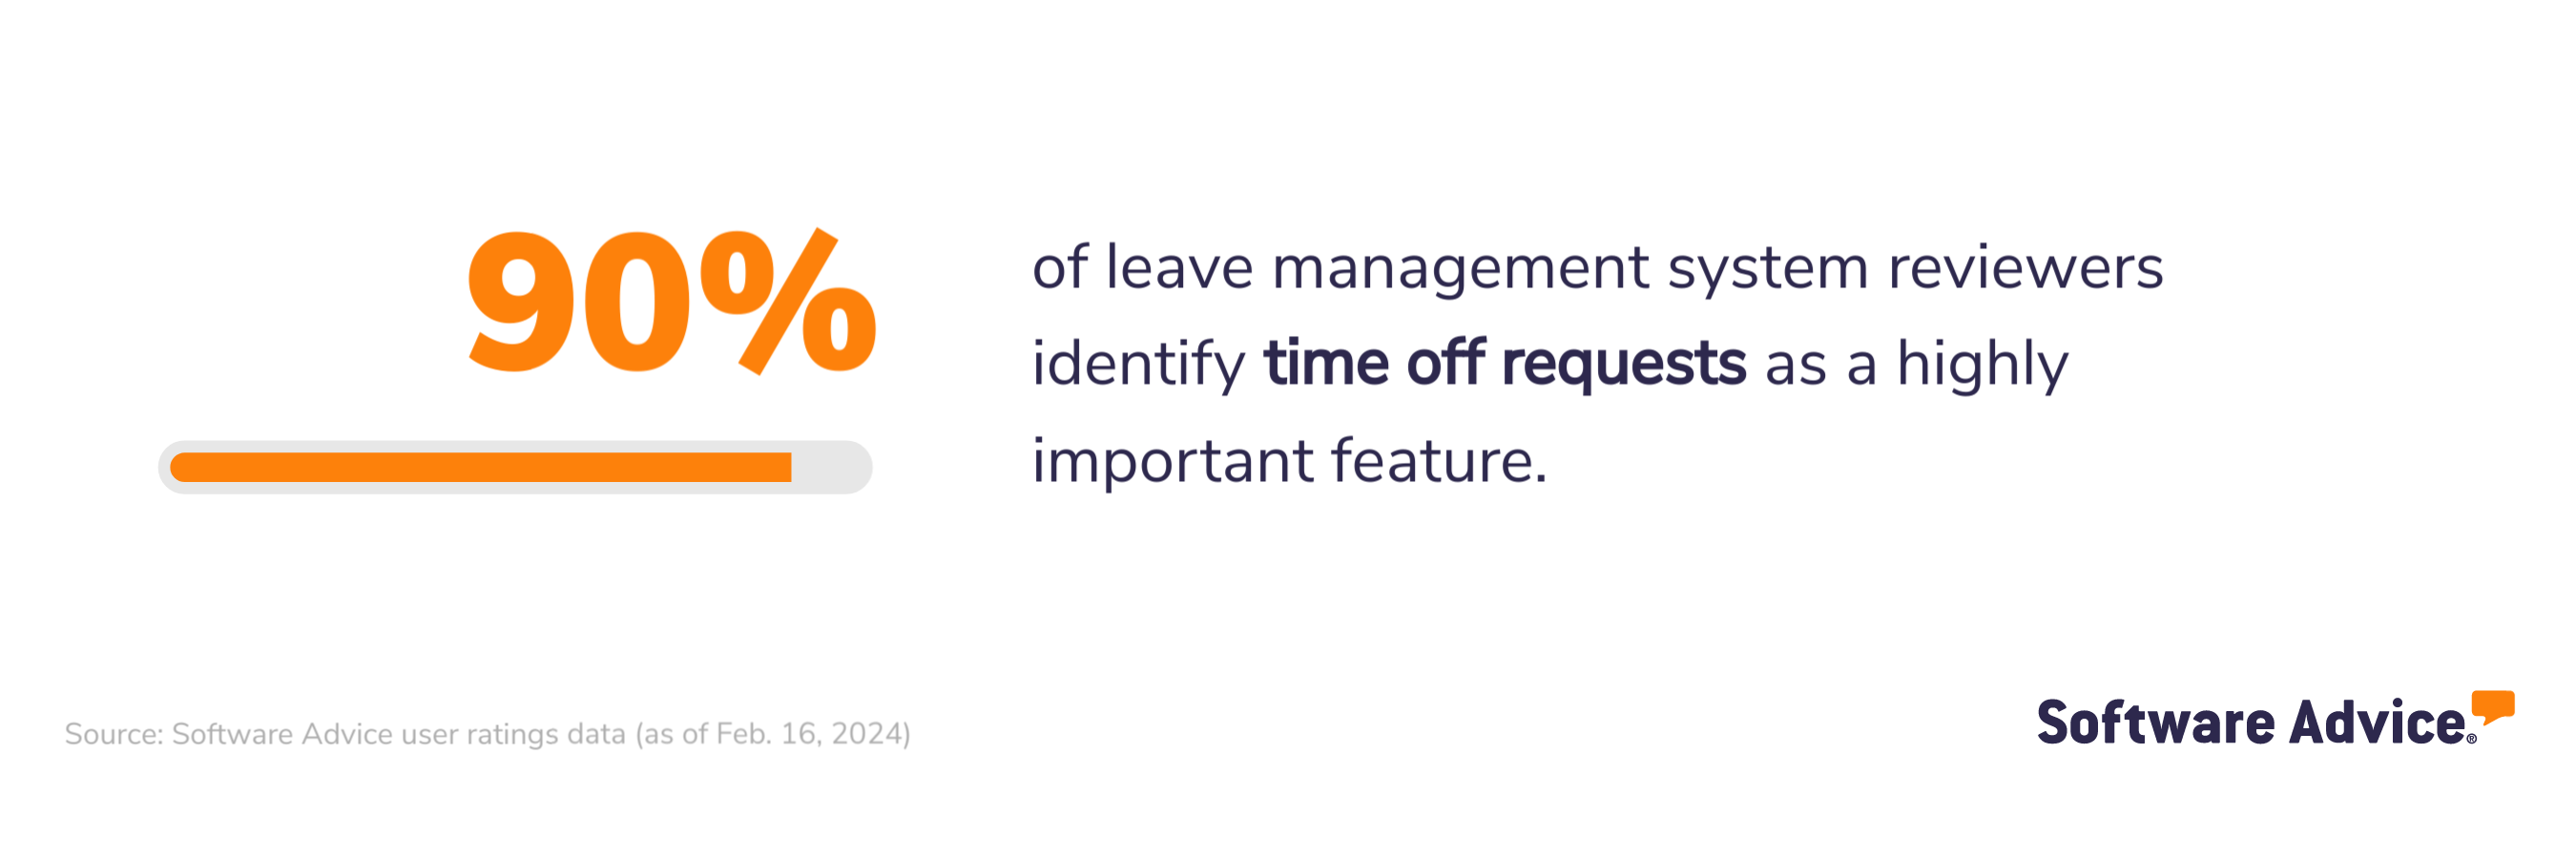 90% of leave management system reviewers identify time off requests as a highly important feature.